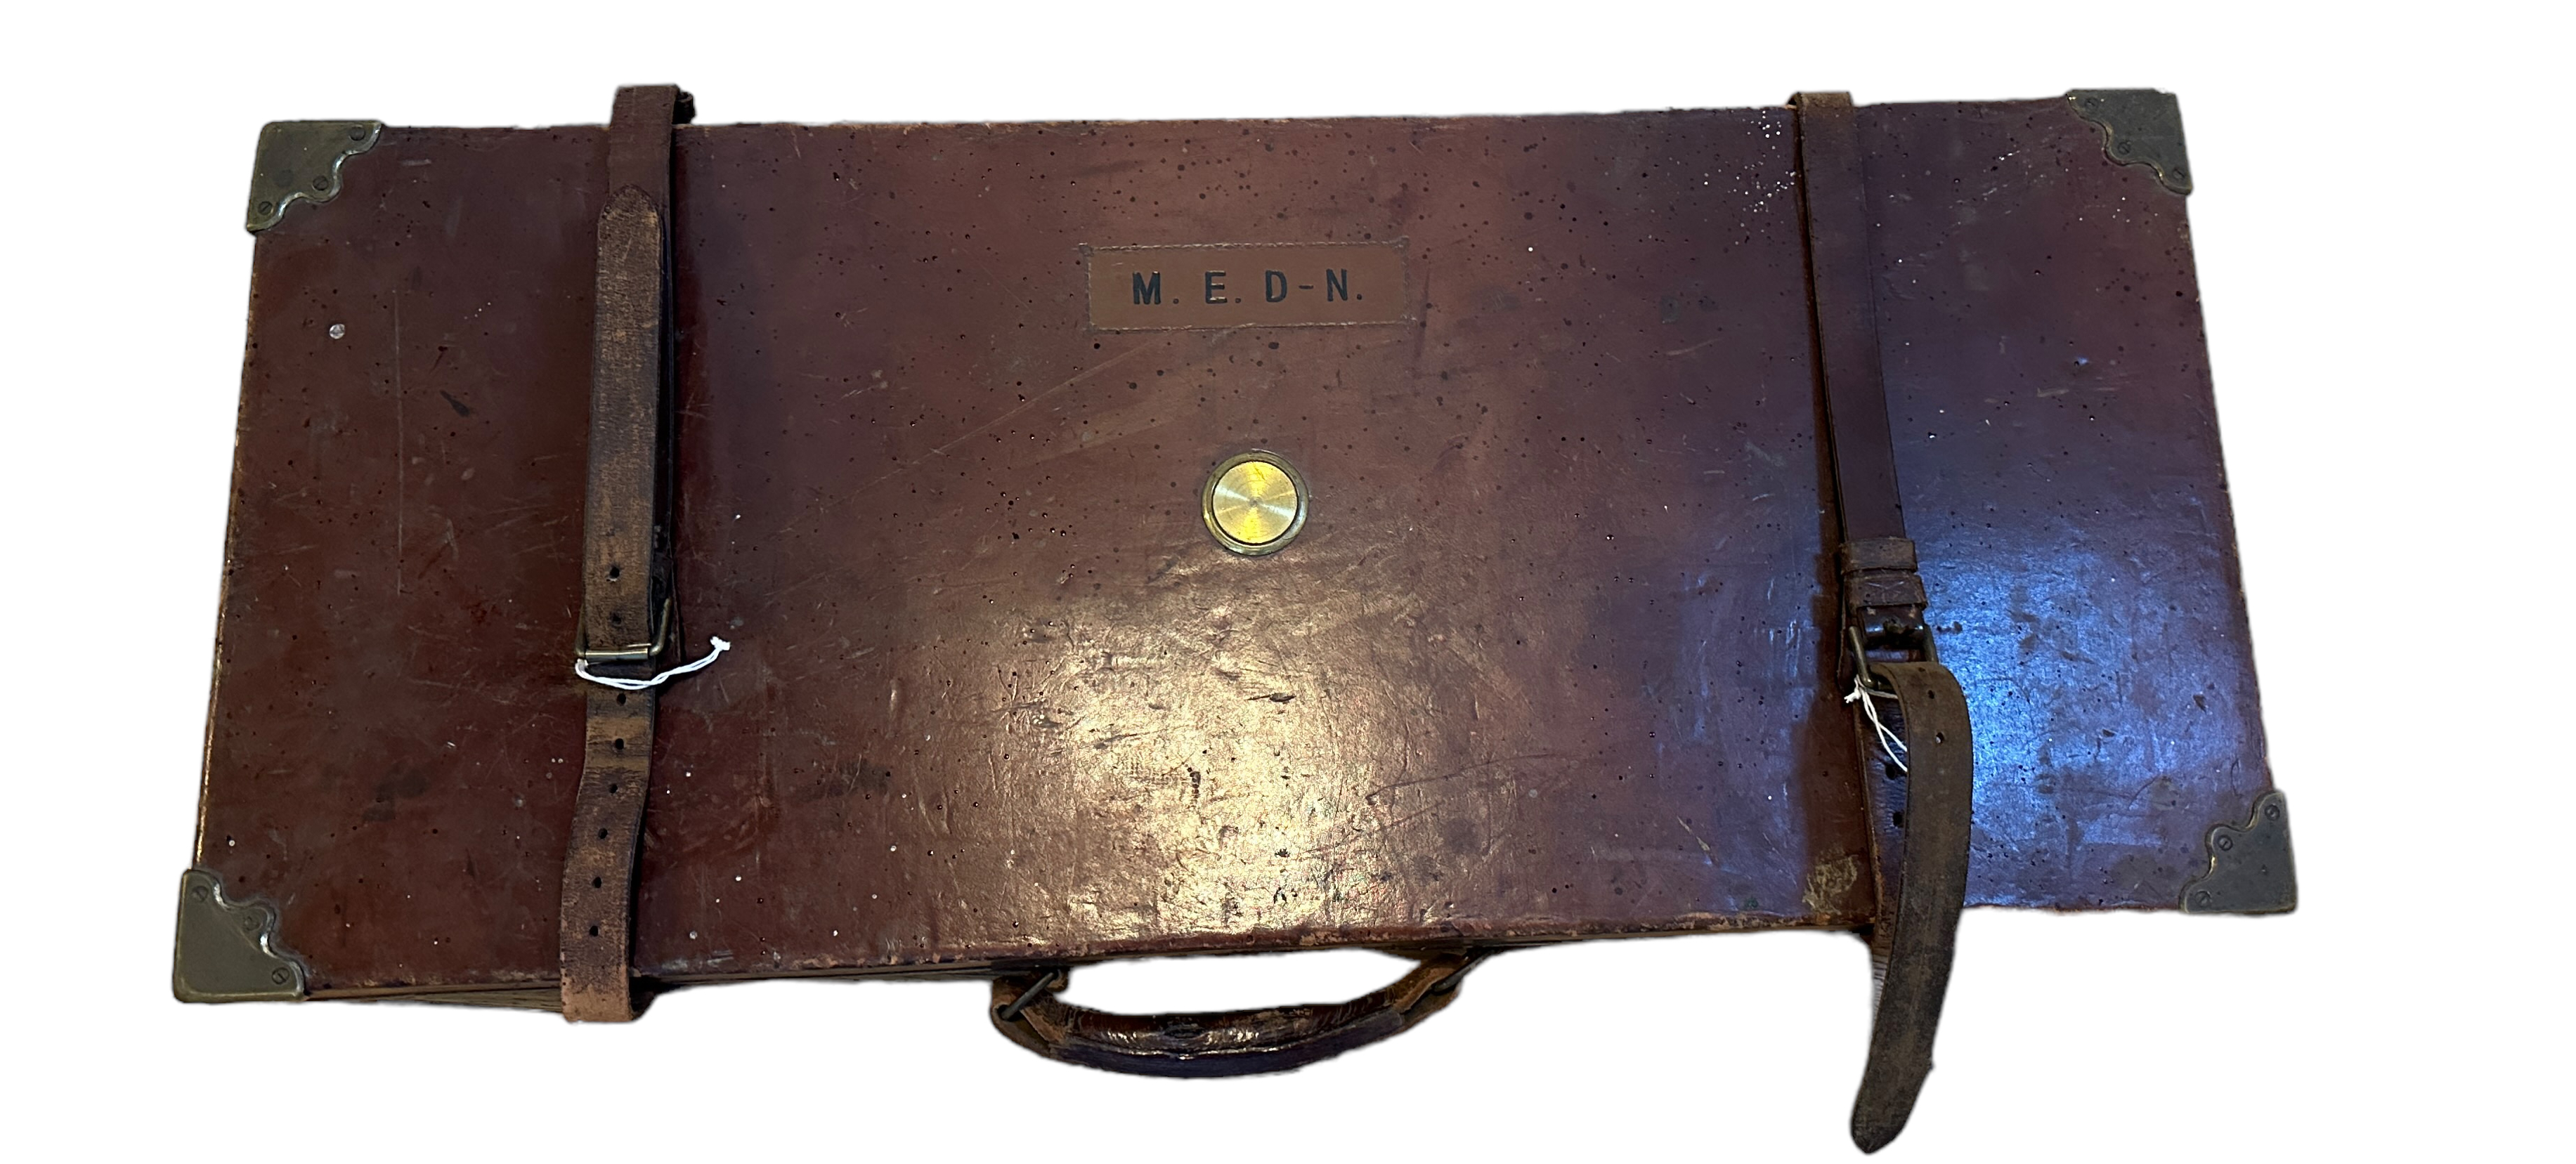 Antique Holland&Holland Leather and Wood Gun Case - 33 1/2" x 14 1/2" x 3 5/8" with fittings.